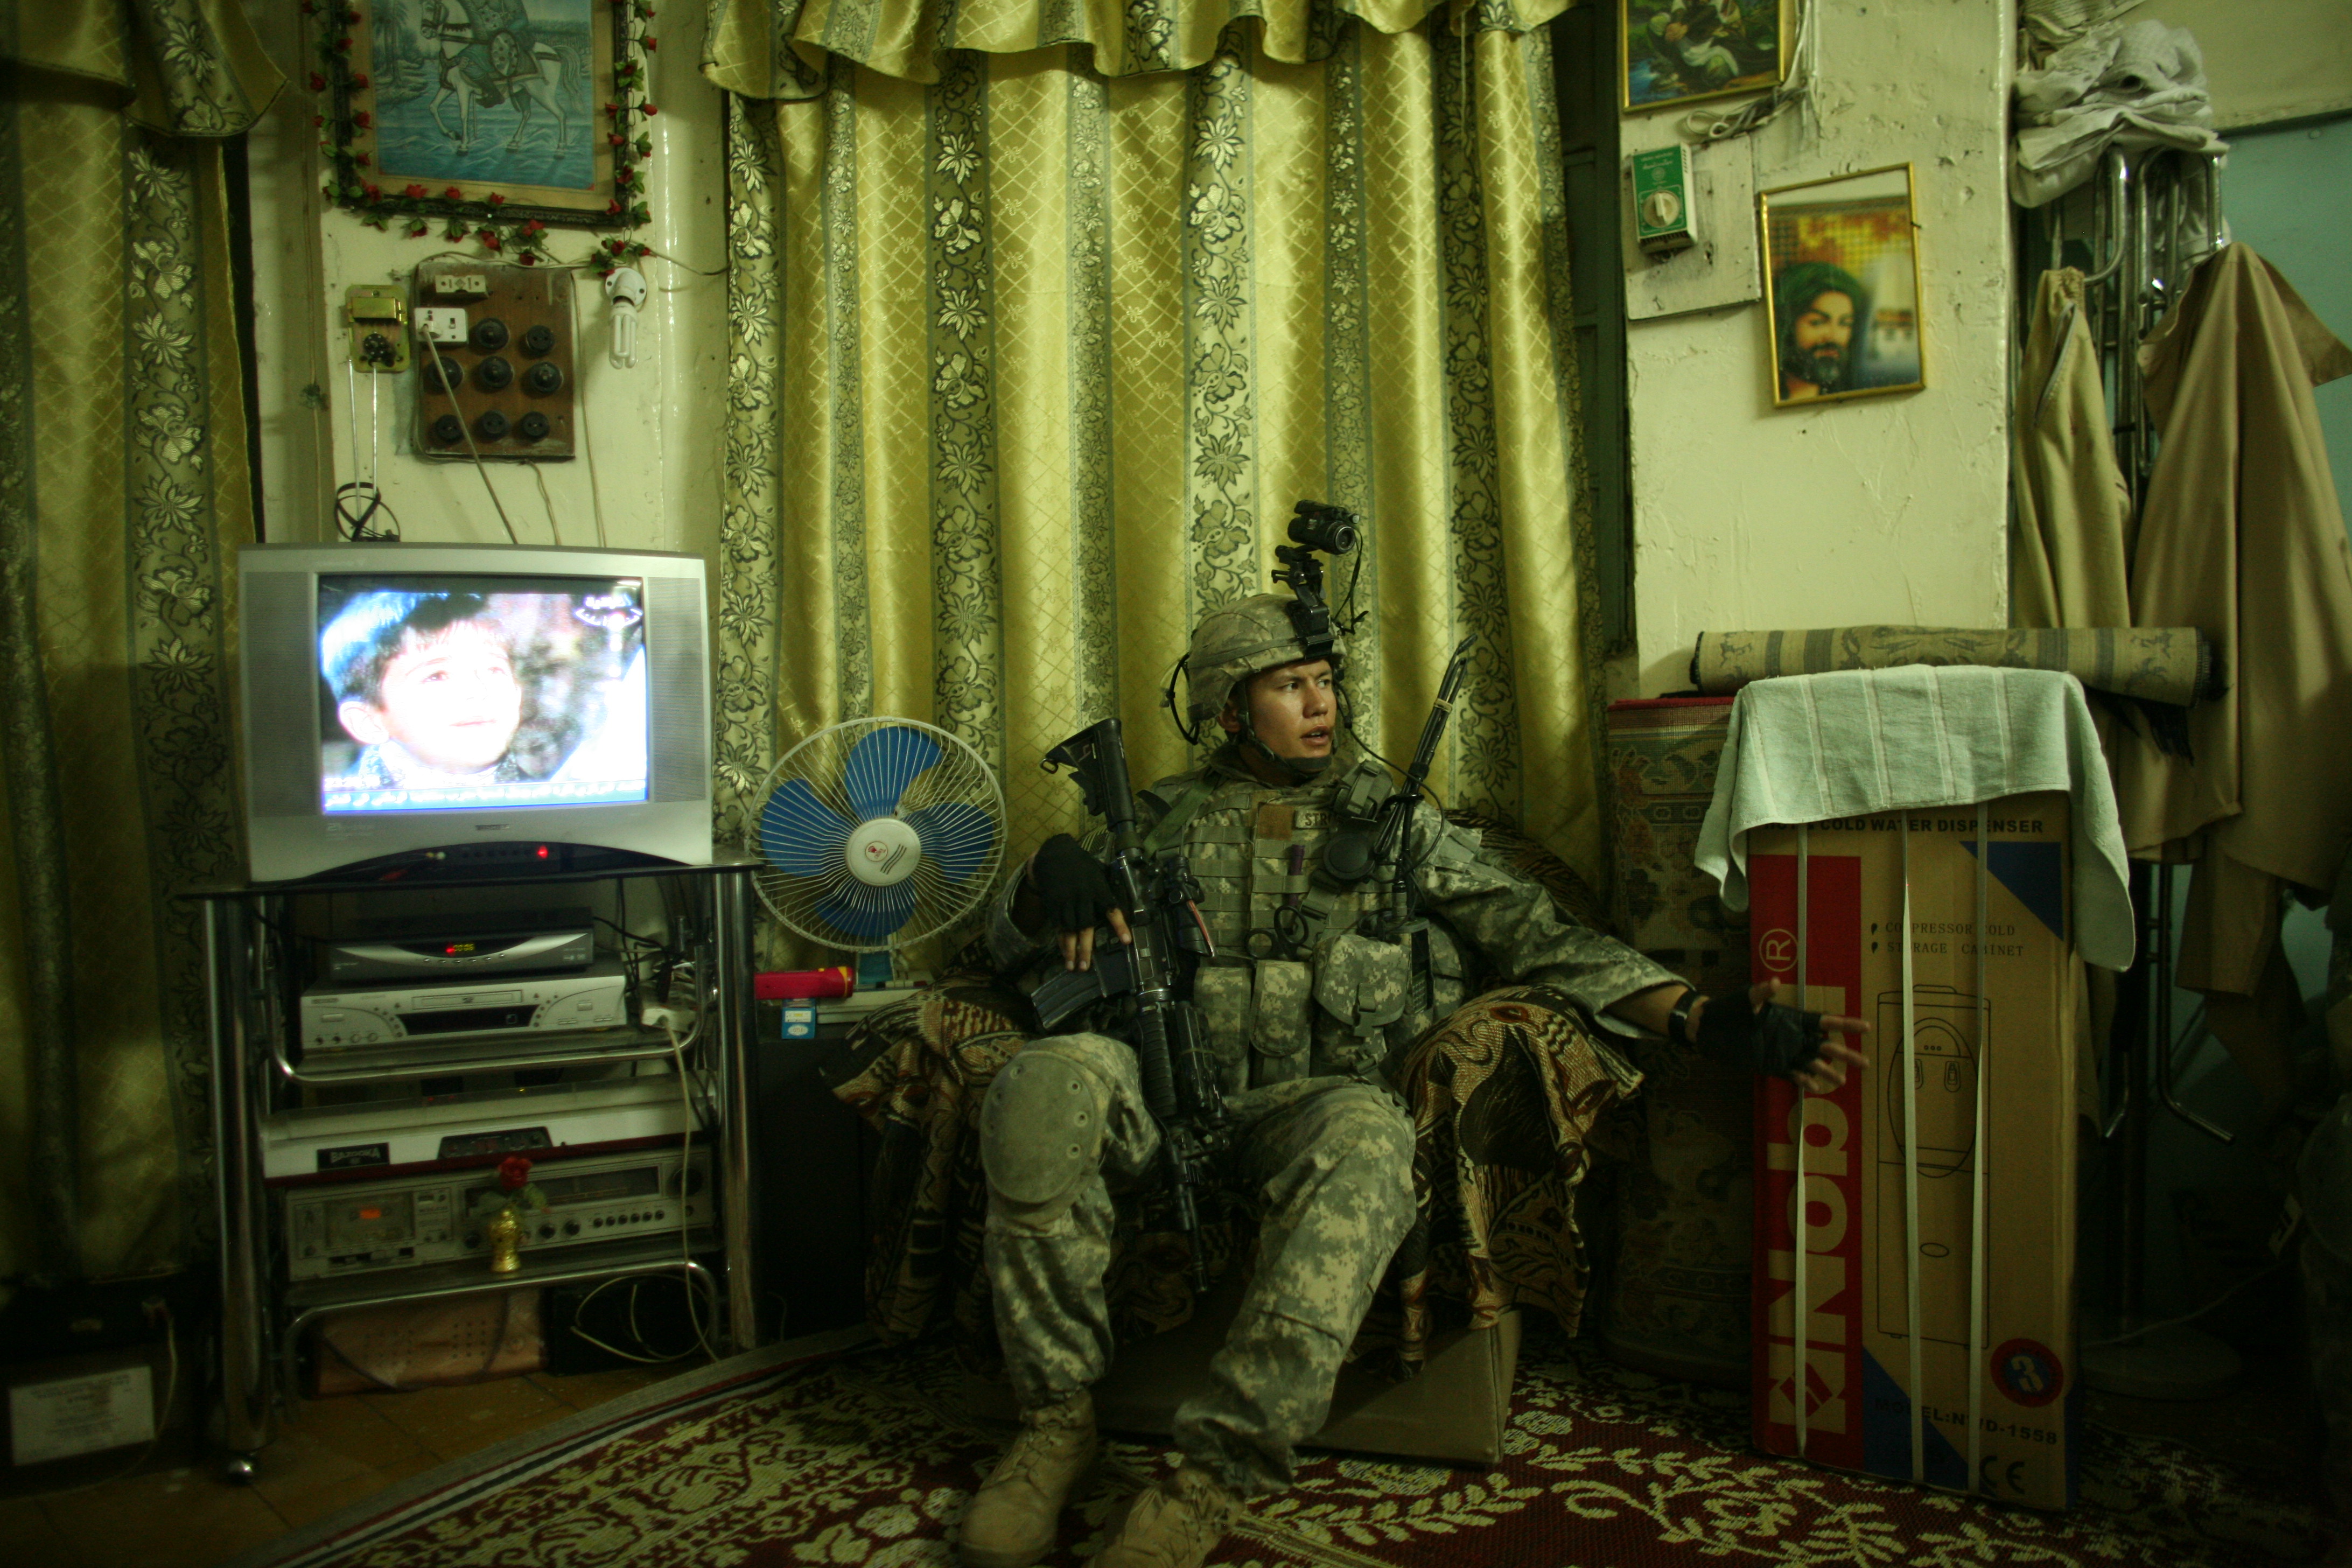 A US soldier sits in an armchair during a search of a private home (photo: Michael Kamber)